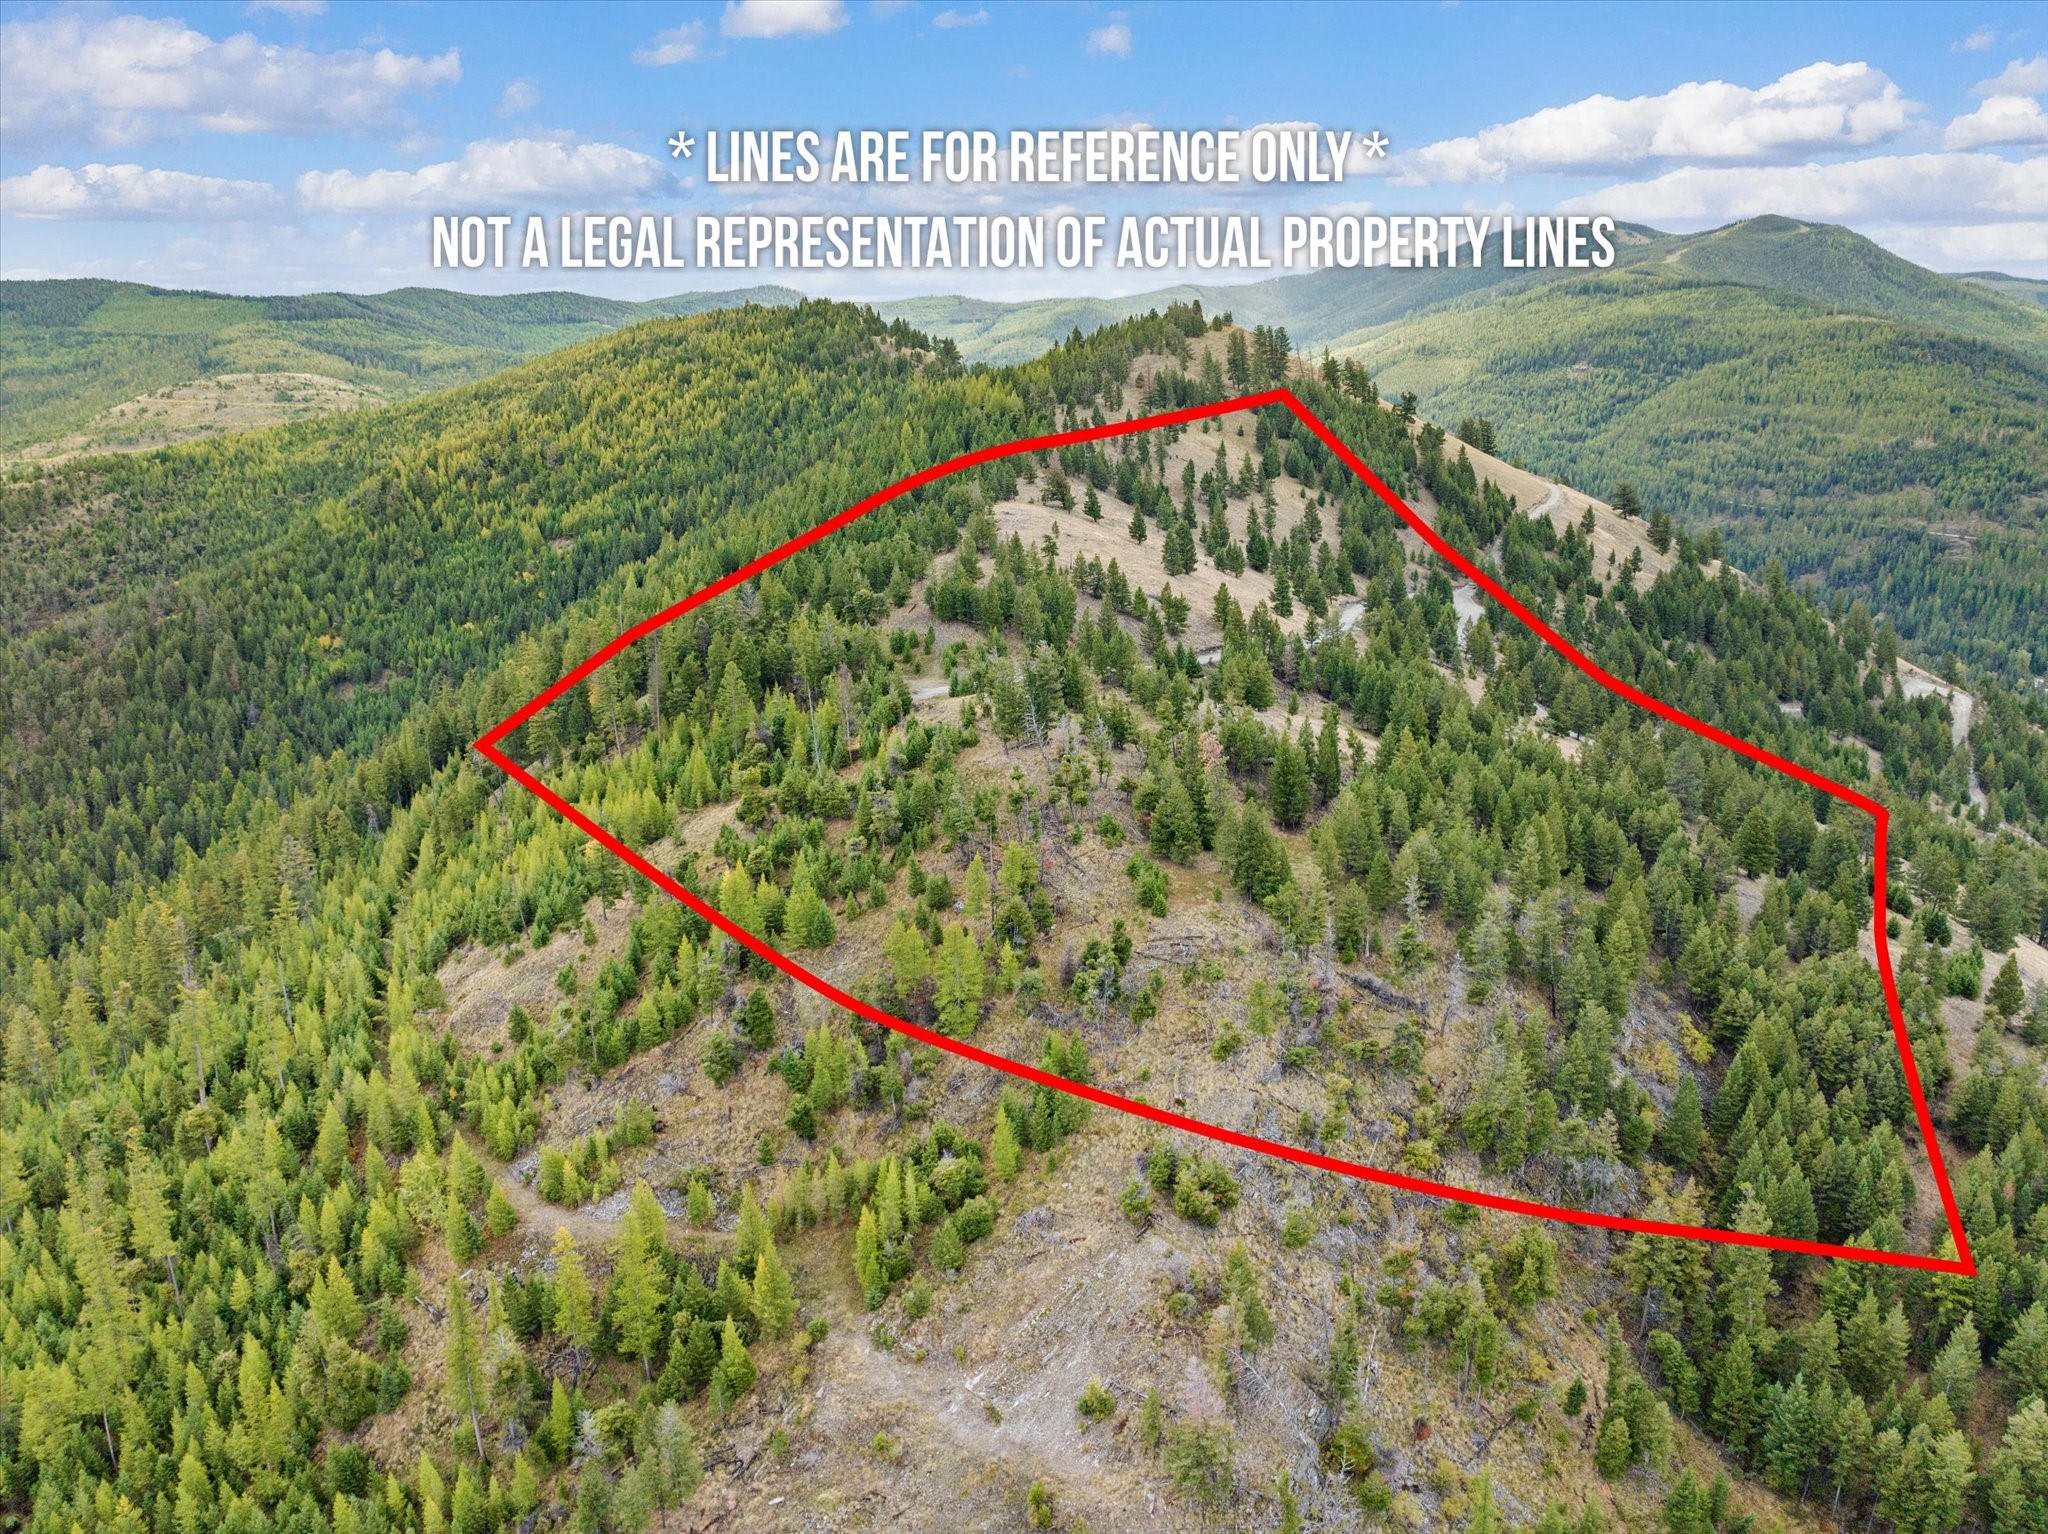 Unique opportunity to own a 80+ acre on an entire mountaintop! All major road work is in and a well developed building site is established. No covenants or zoning, wild game frequent the property, and lumber company land is accessible from the property. Power is available, and the seller will credit up to $100,000 to bring power to the property. Don't miss this rare opportunity to own a generational gem! Currently split into two 40 acre tracts. Call Mark Beck at 406-261-6602 or your Real Estate professional for more information.